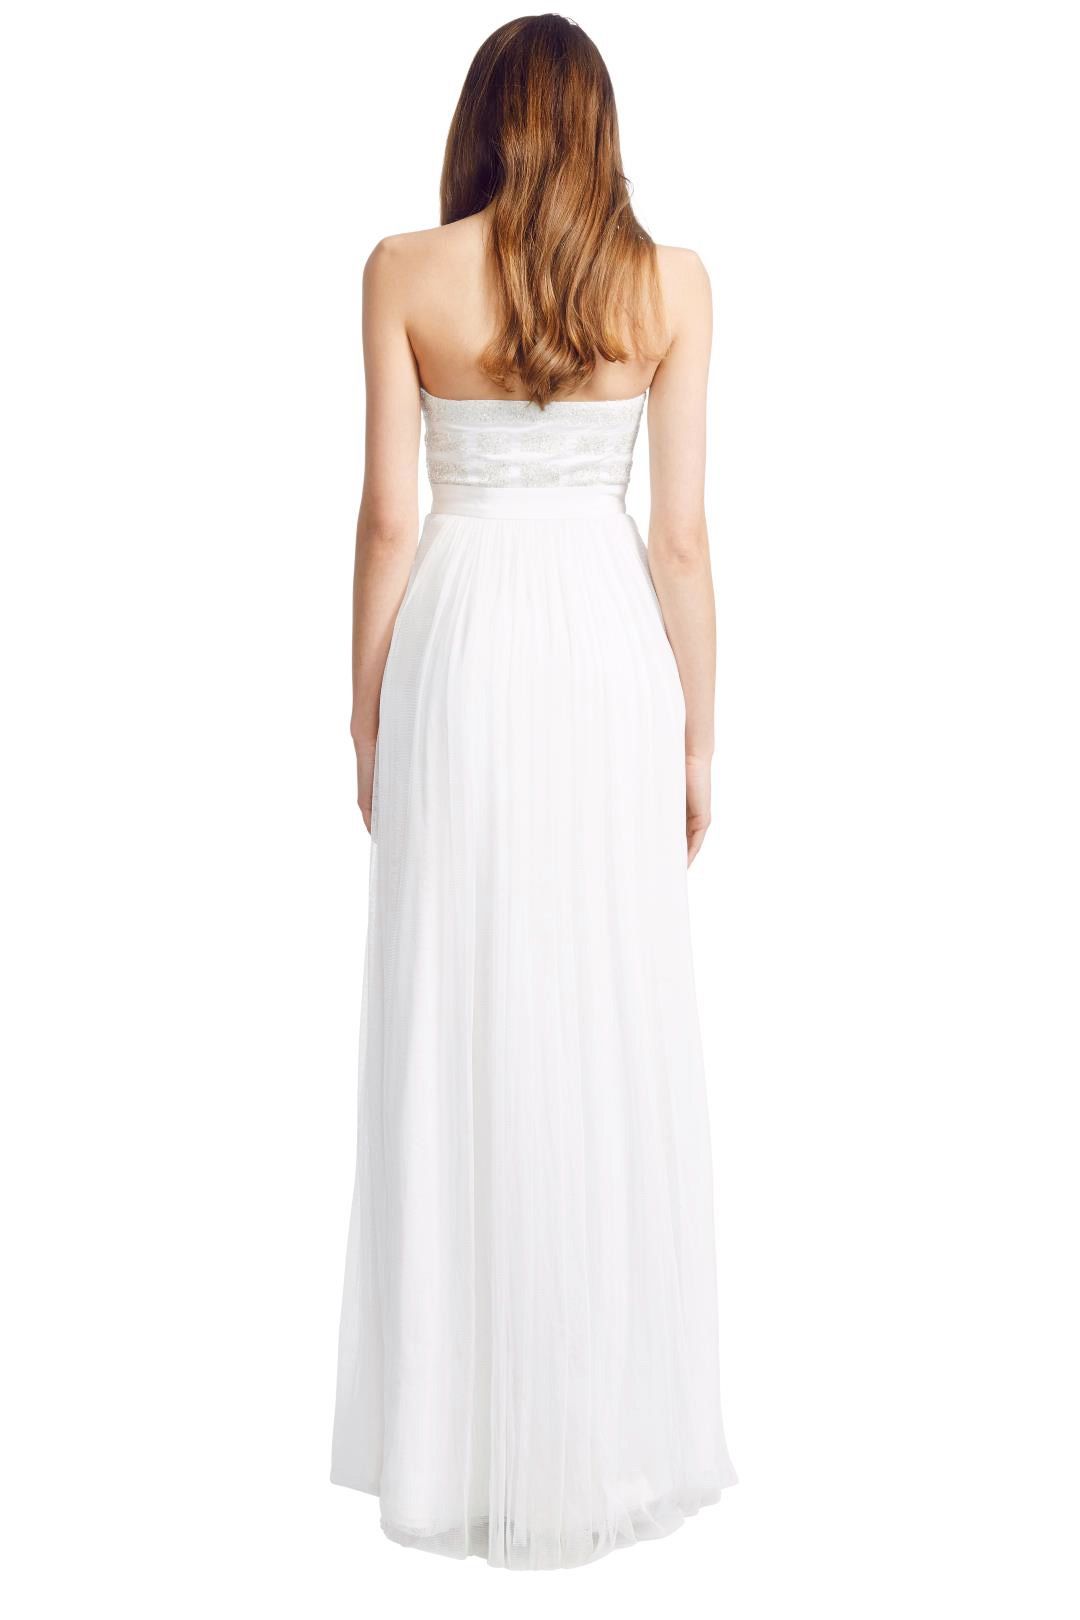 George - Pixel Gown - White - Back